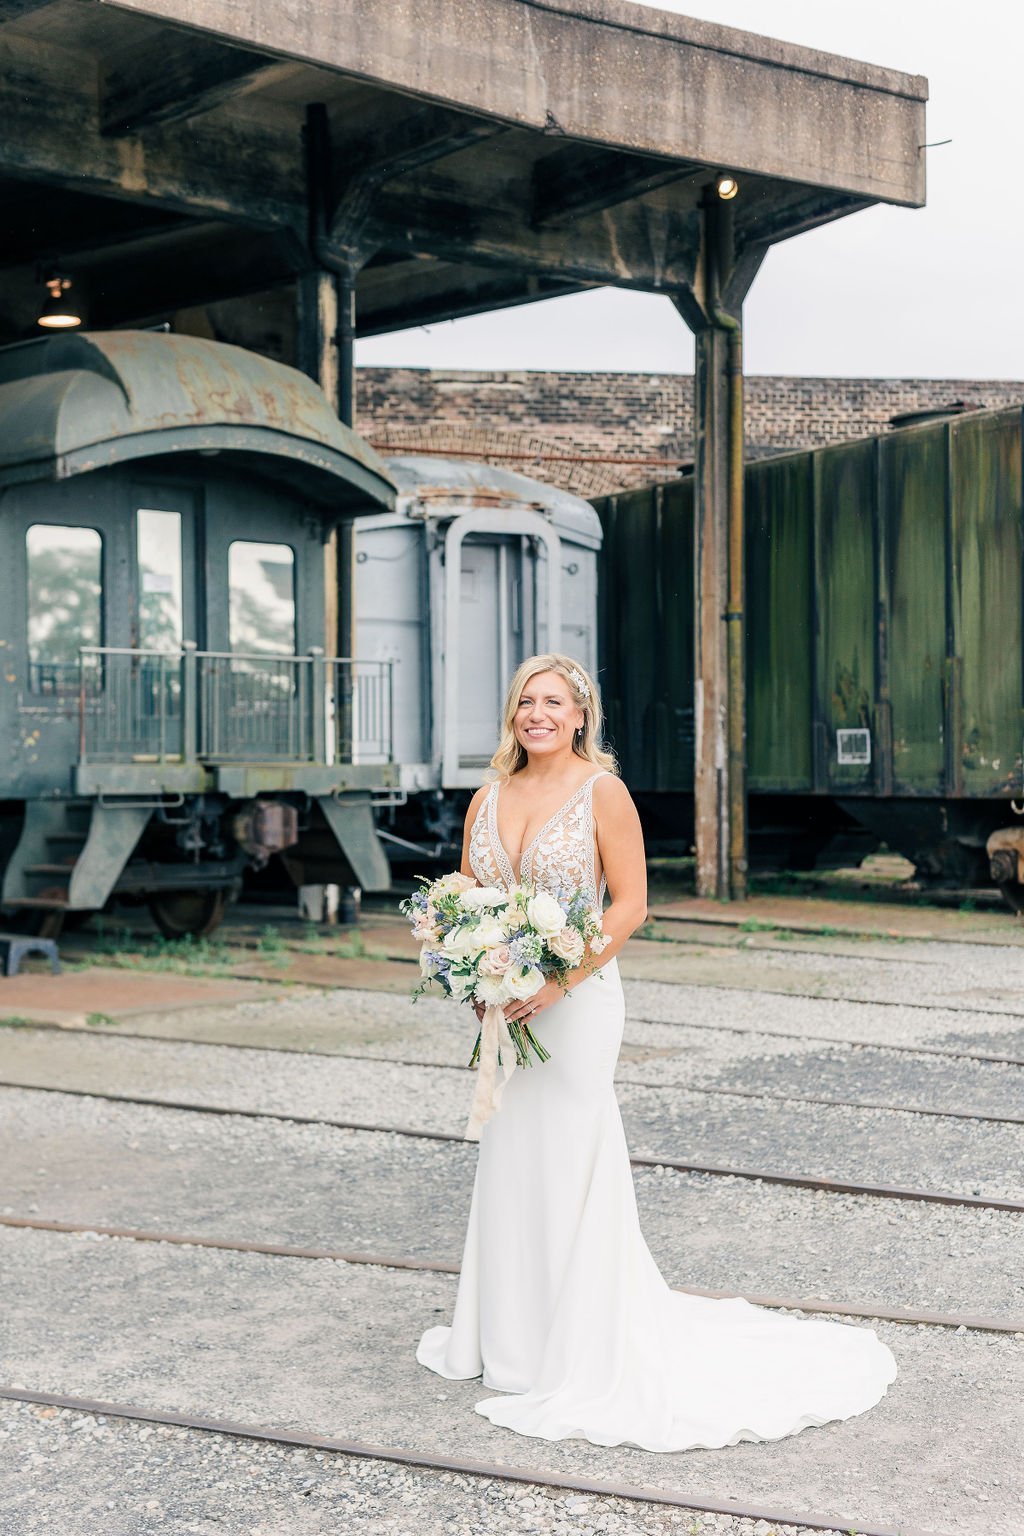 claudia-and-travis-romantic-southern-wedding-at-the-georgia-state-railroad-museum-in-savannah-georgia-planned-by-savannah-wedding-planner-and-savannah-florist-ivory-and-beau-5.jpg